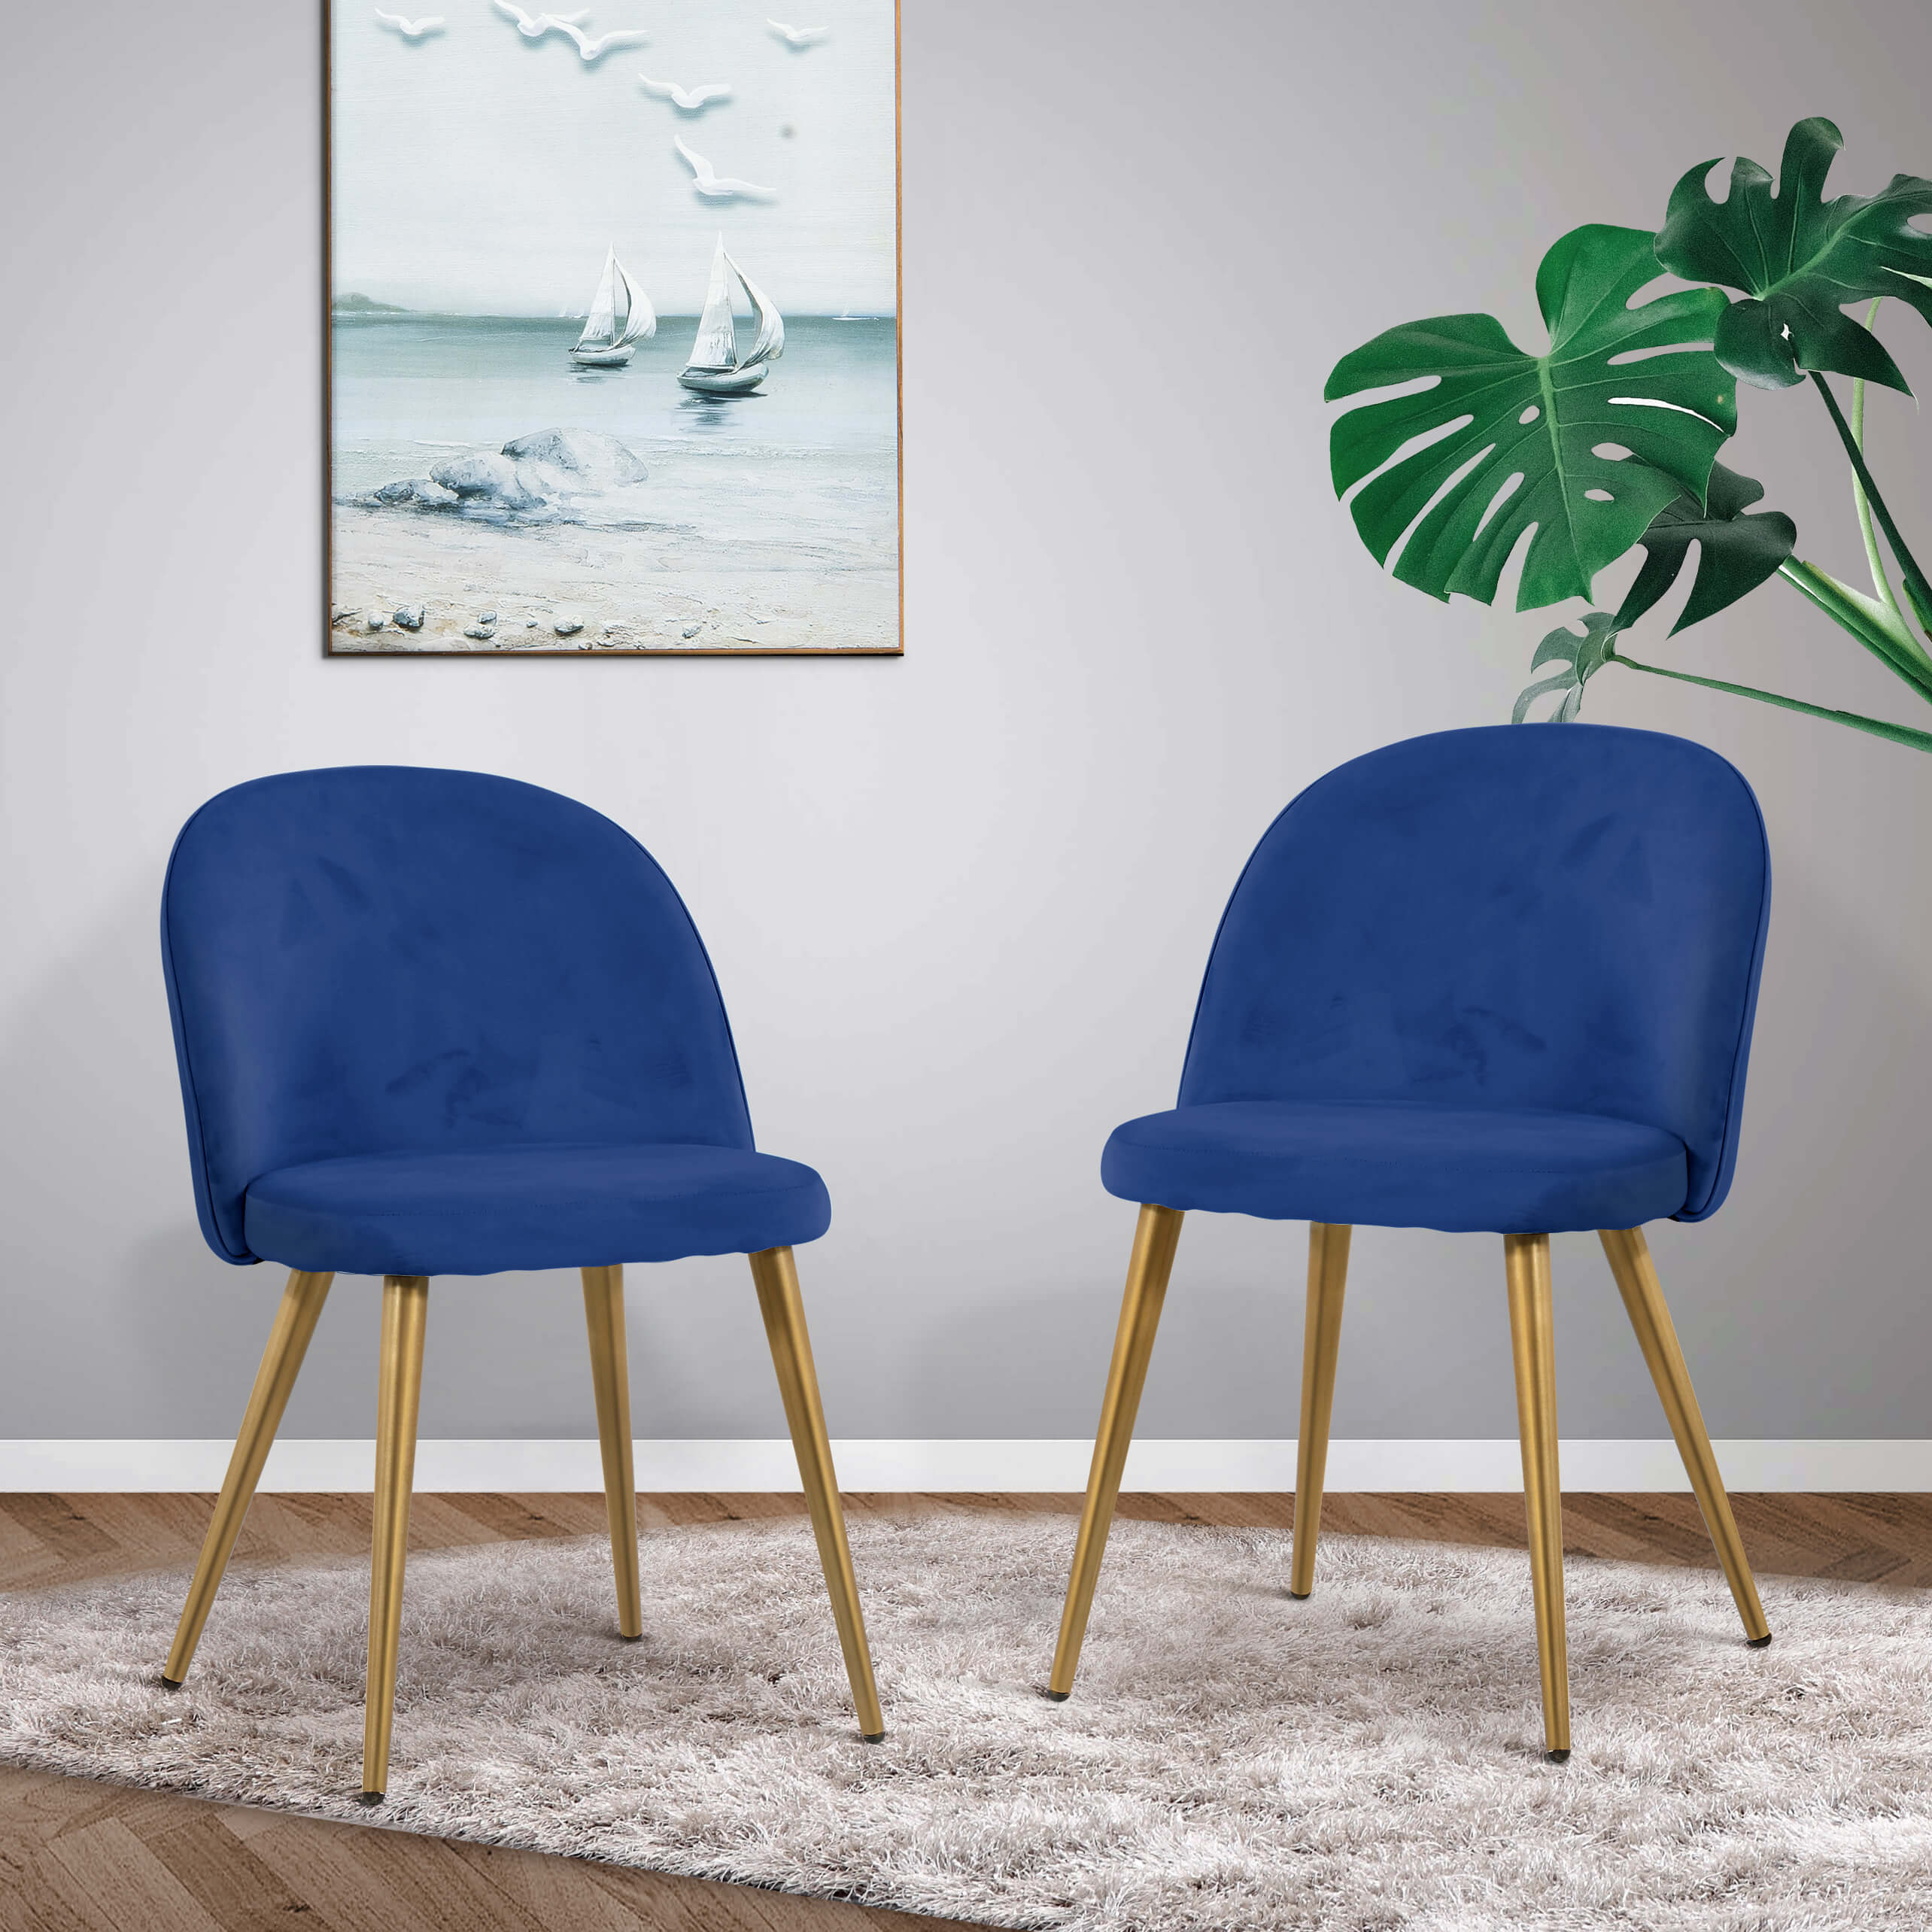 Ivinta Velvet Dining Chairs Set of 2, Soft Tufted Modern Living Room Chairs